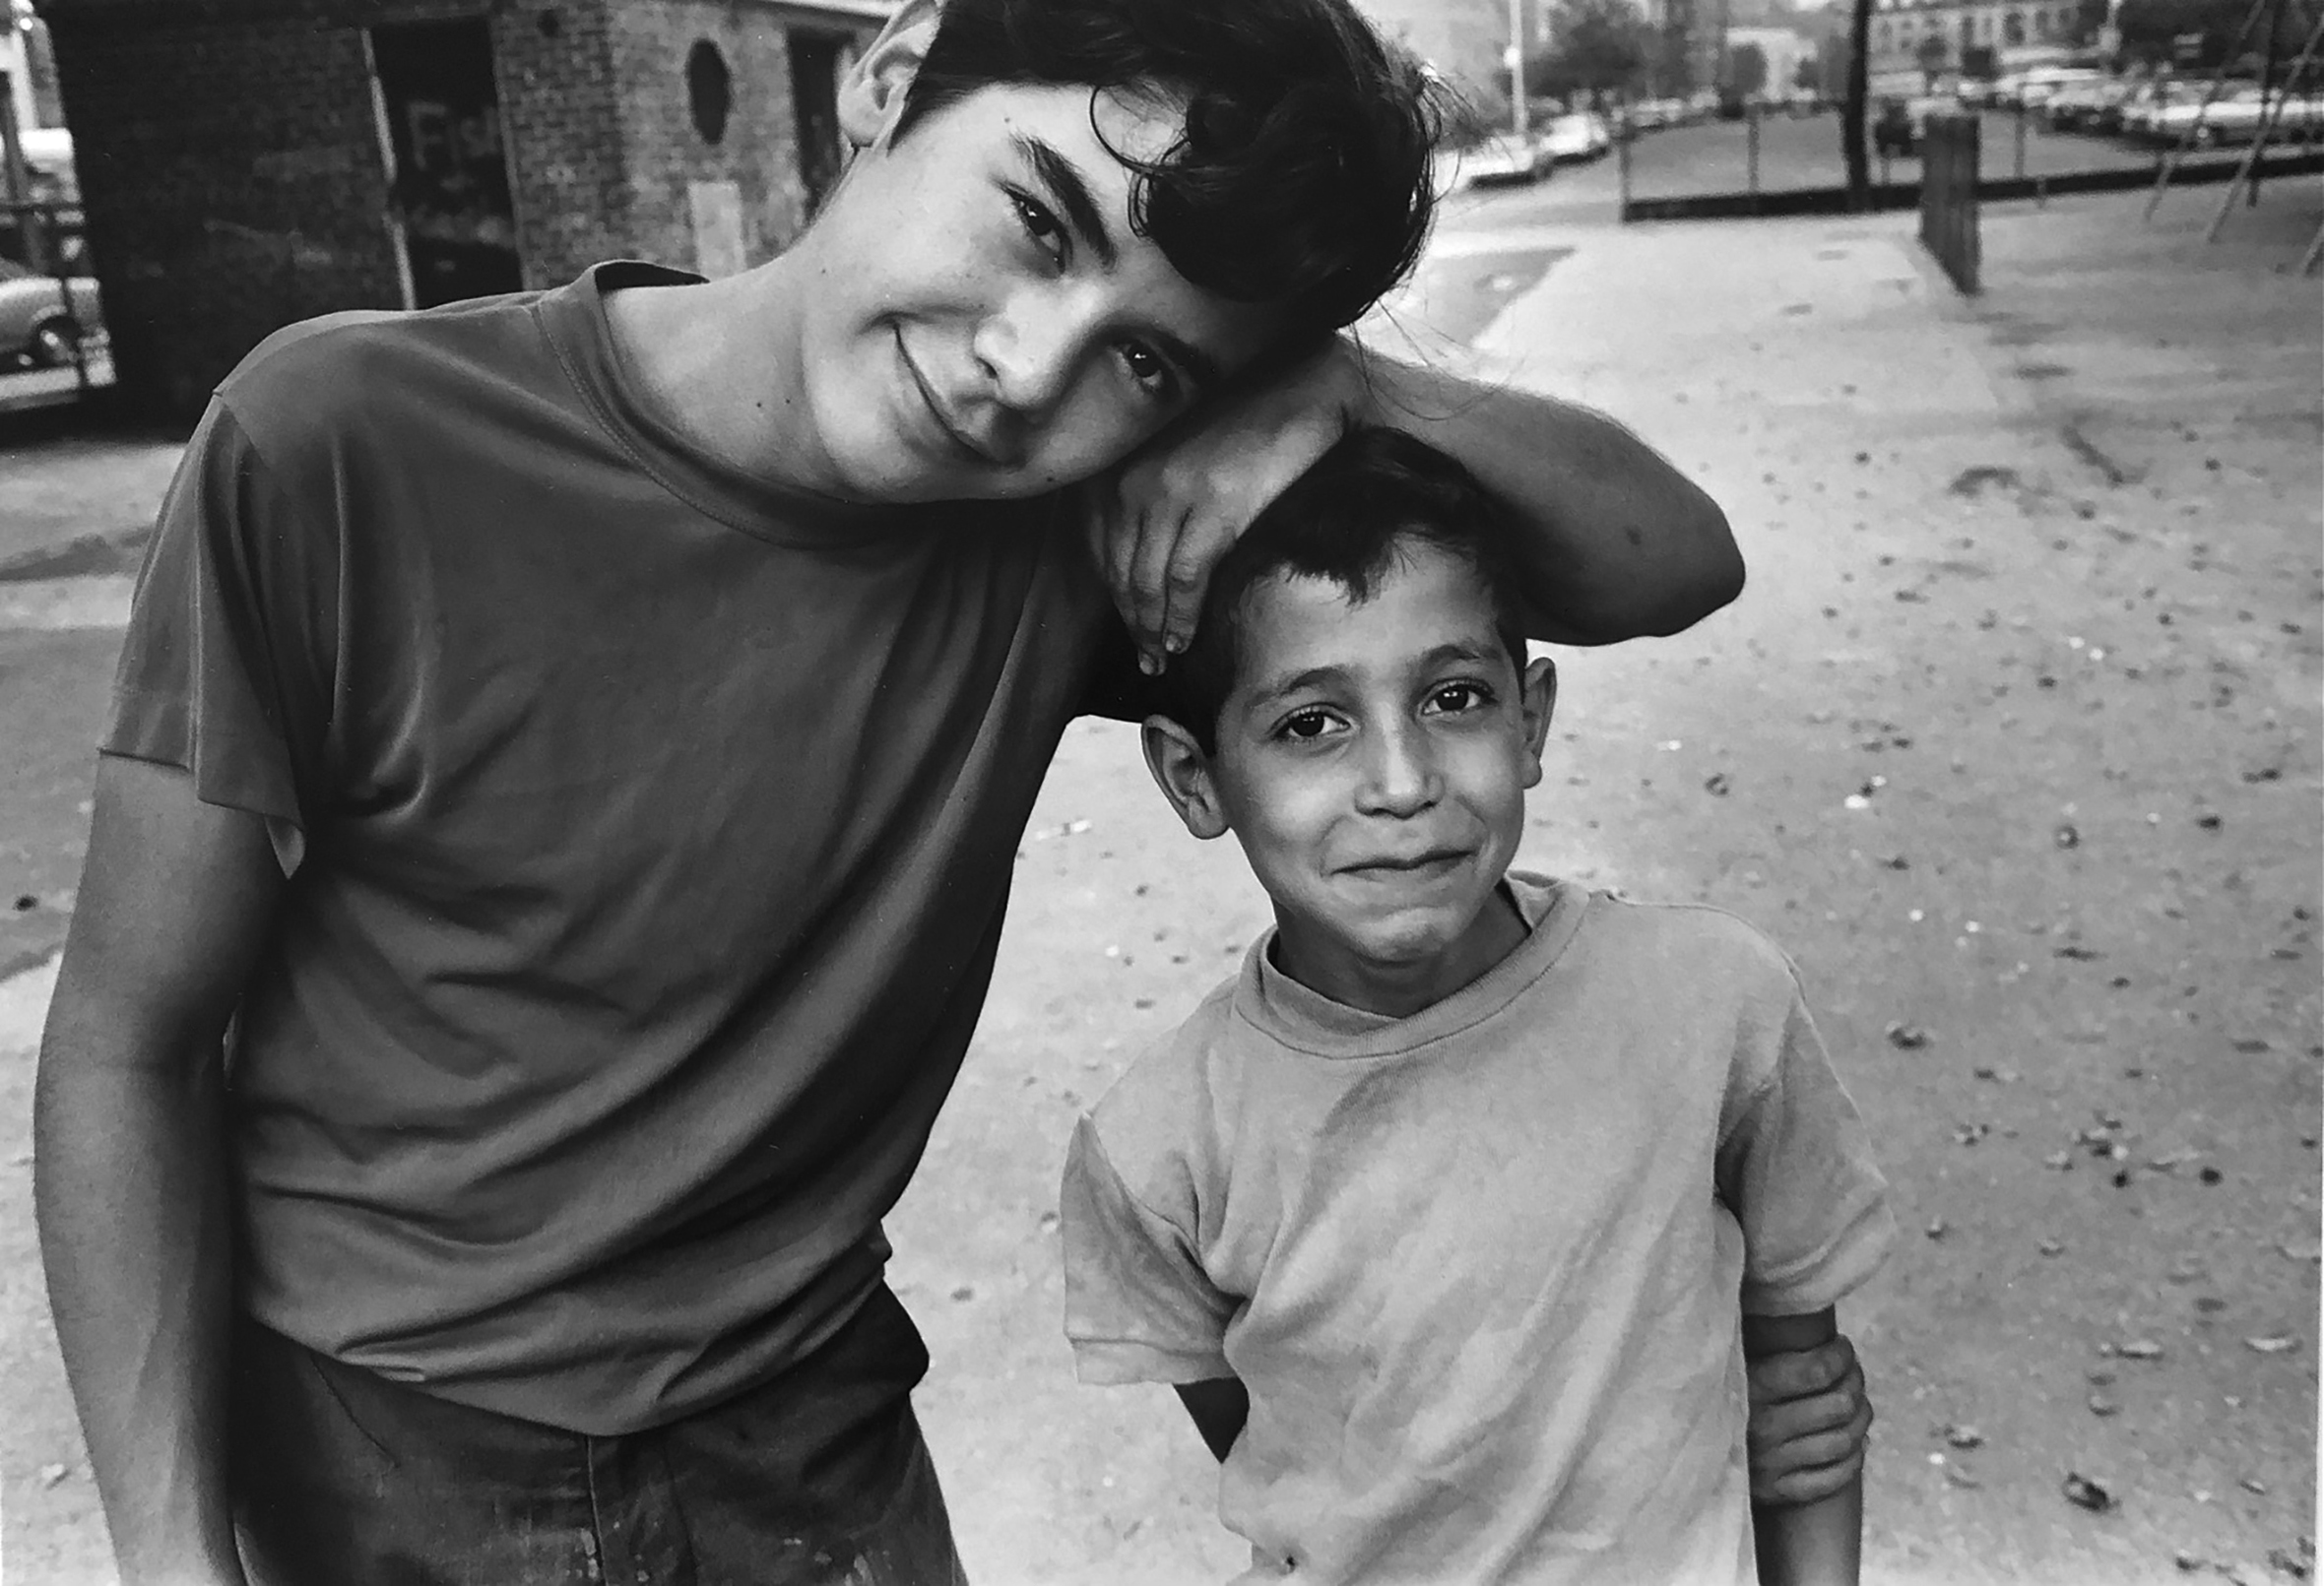 Two boys stand and smile at the camera. The older boy rests his arm on the top of the younger boy and leans his whole body toward the younger one.